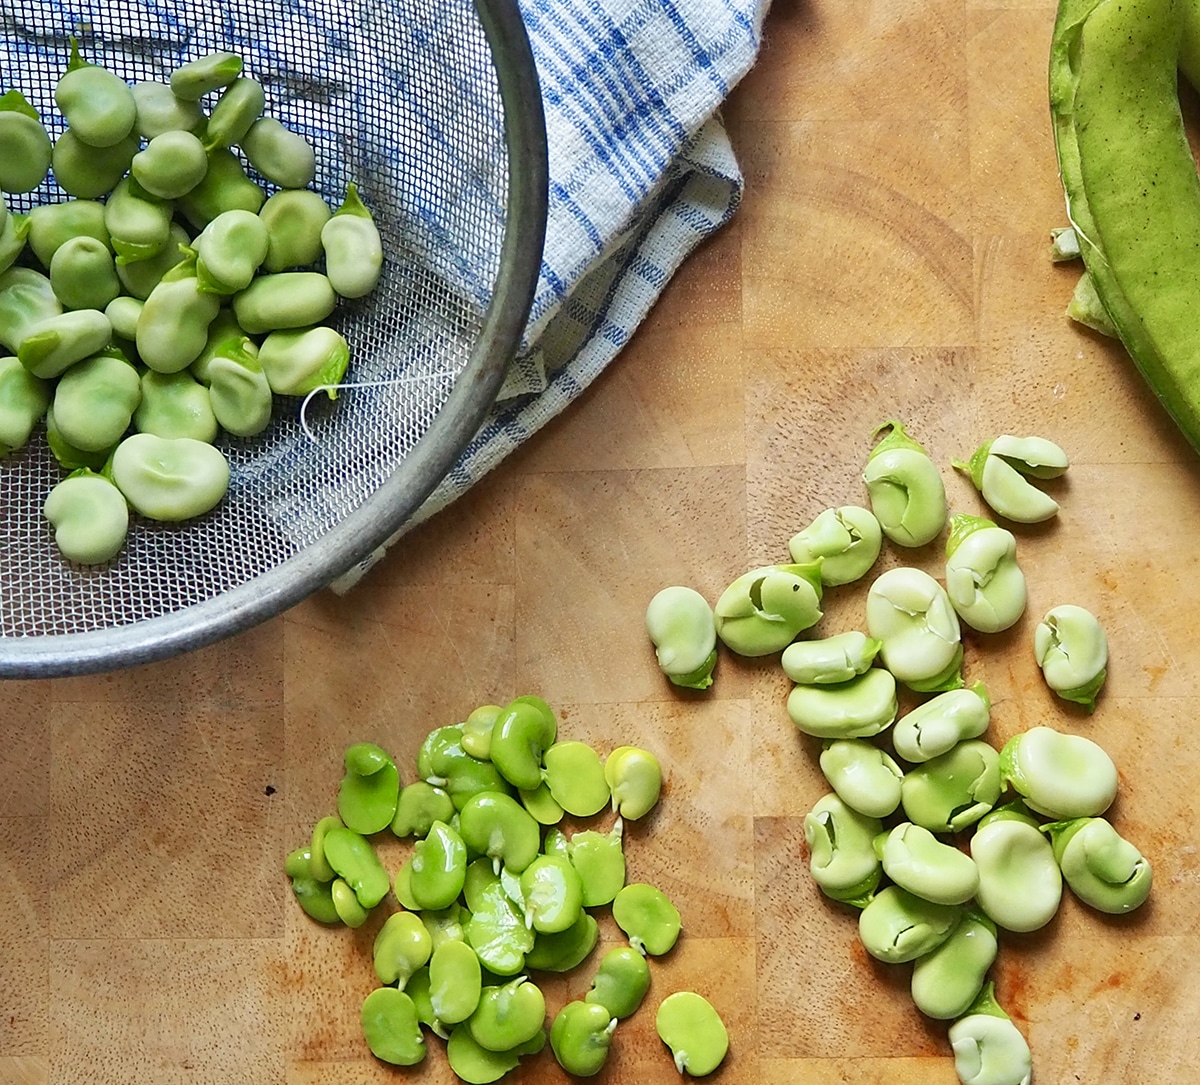 Fresh broad beans on a table